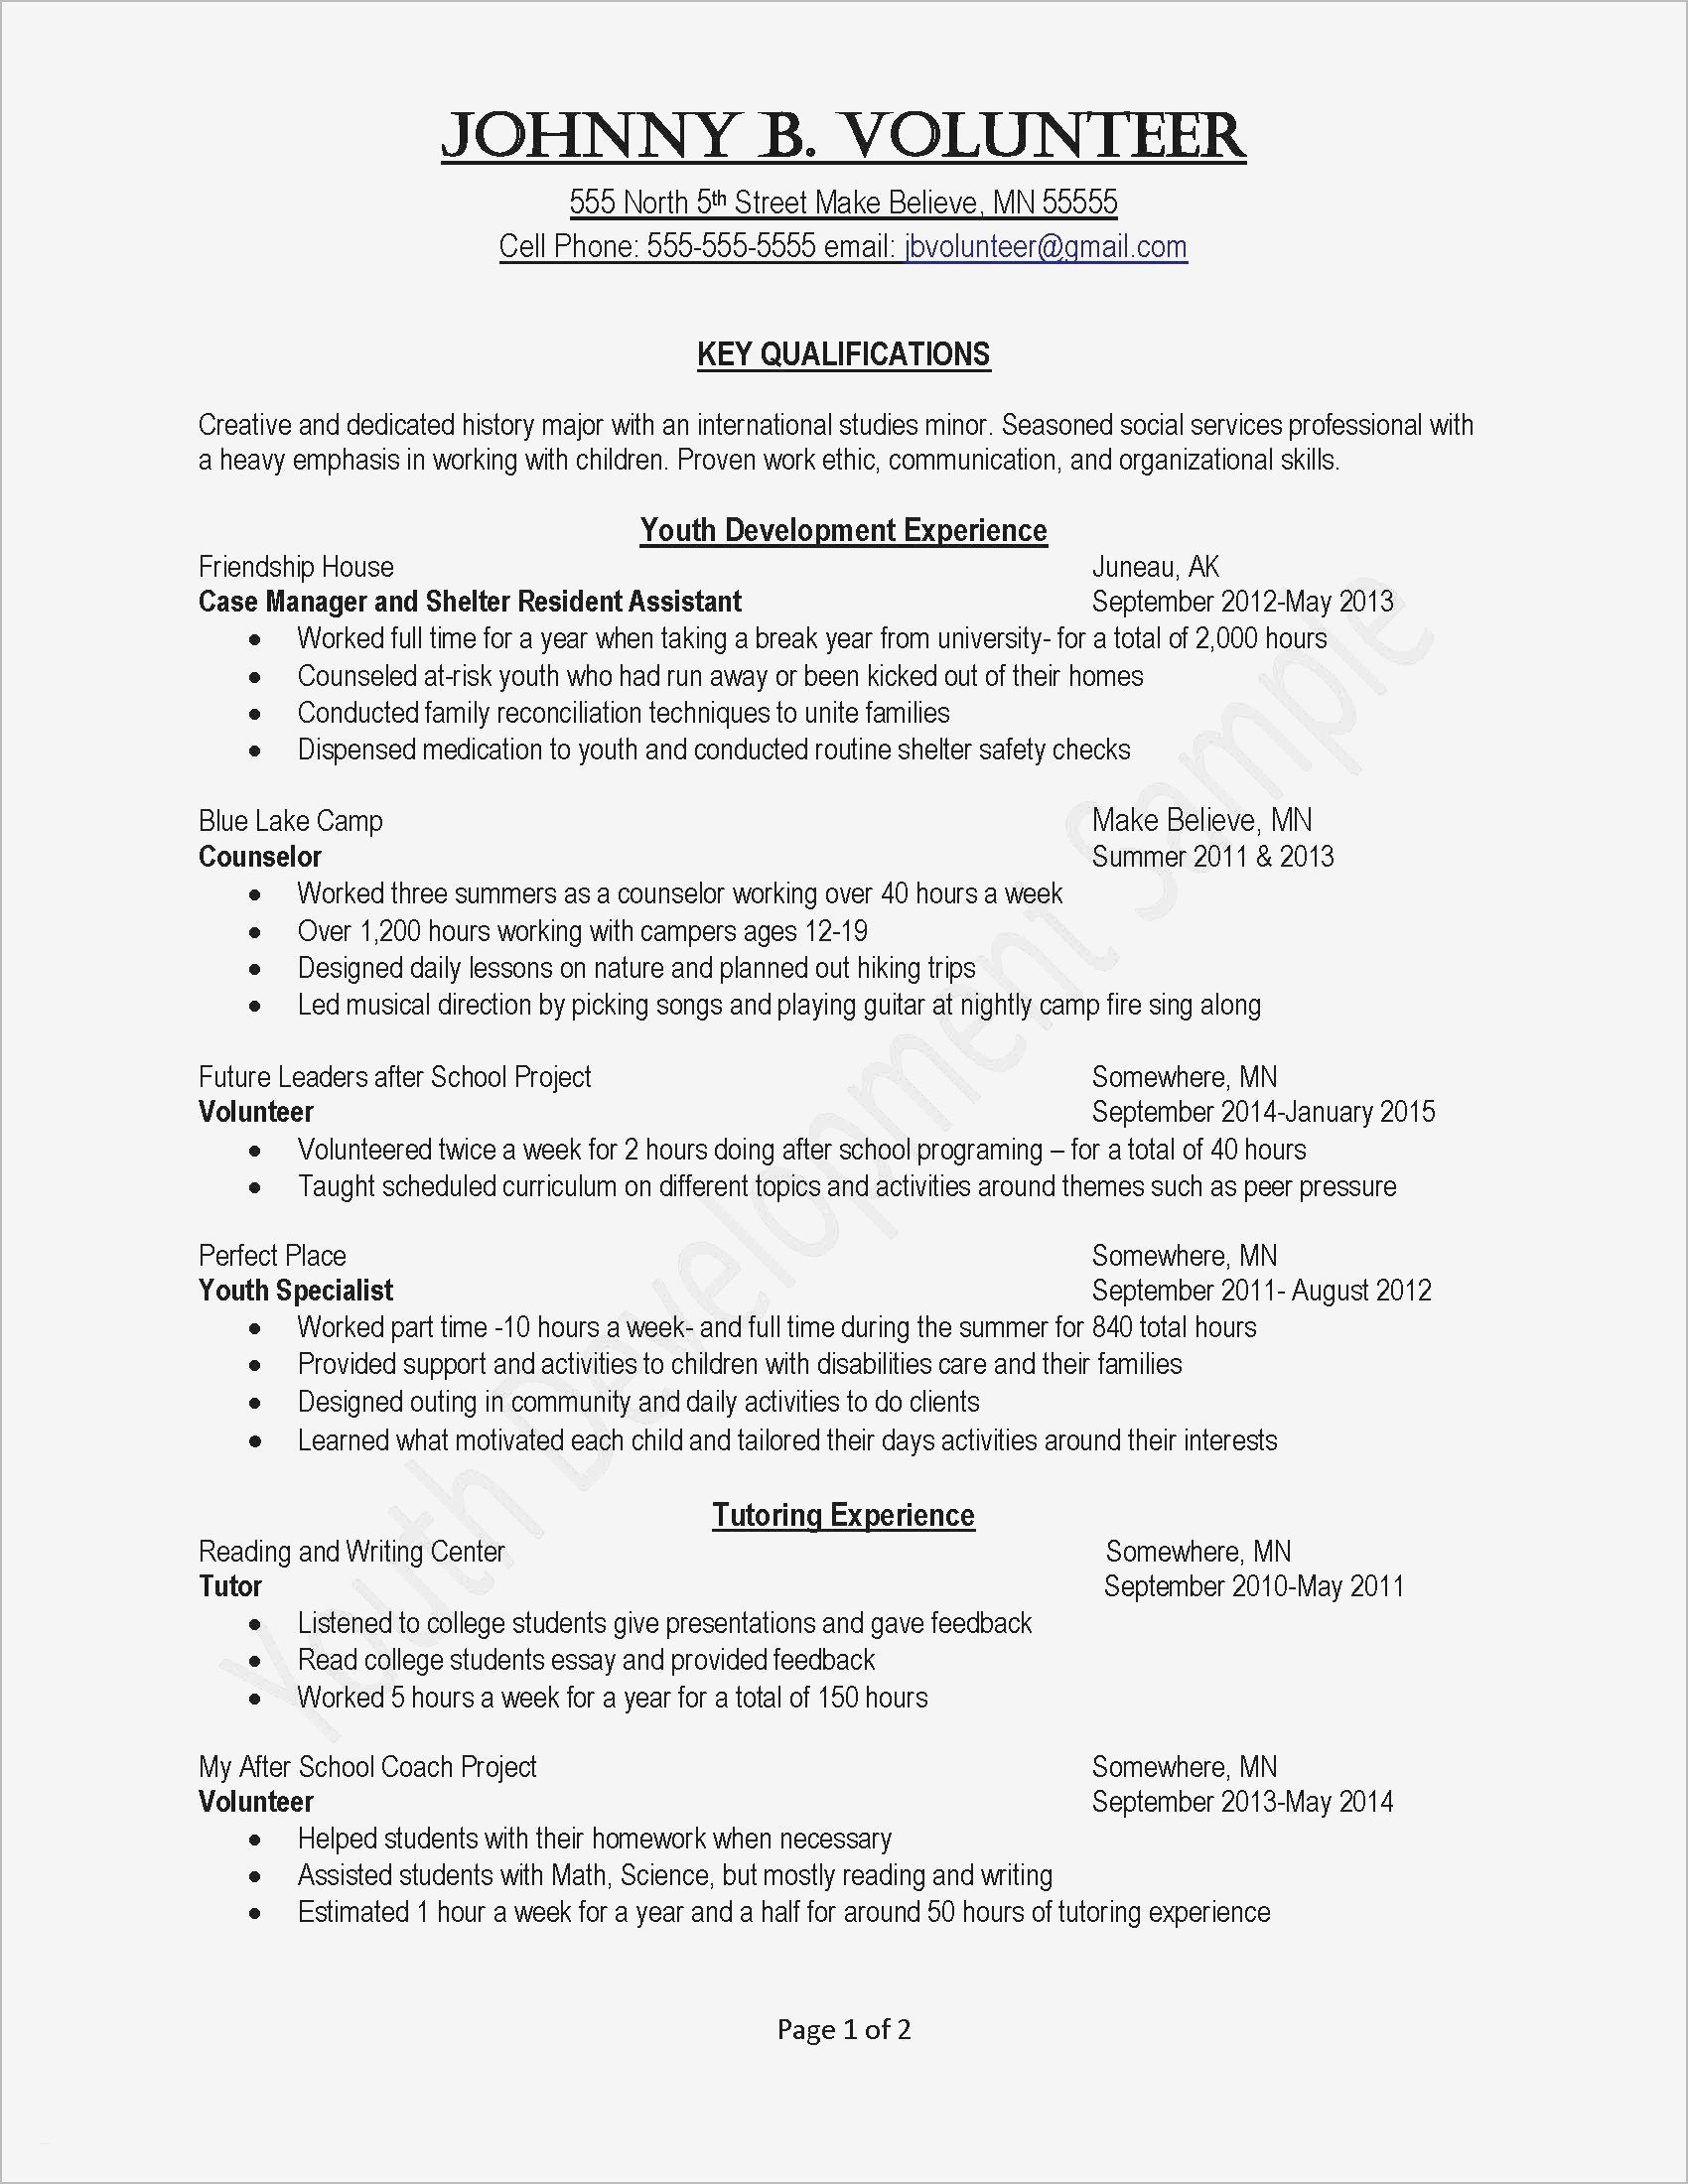 Cv Cover Letter Template - 1 Page Resume Templates Fresh Job Fer Letter Template Us Copy Od